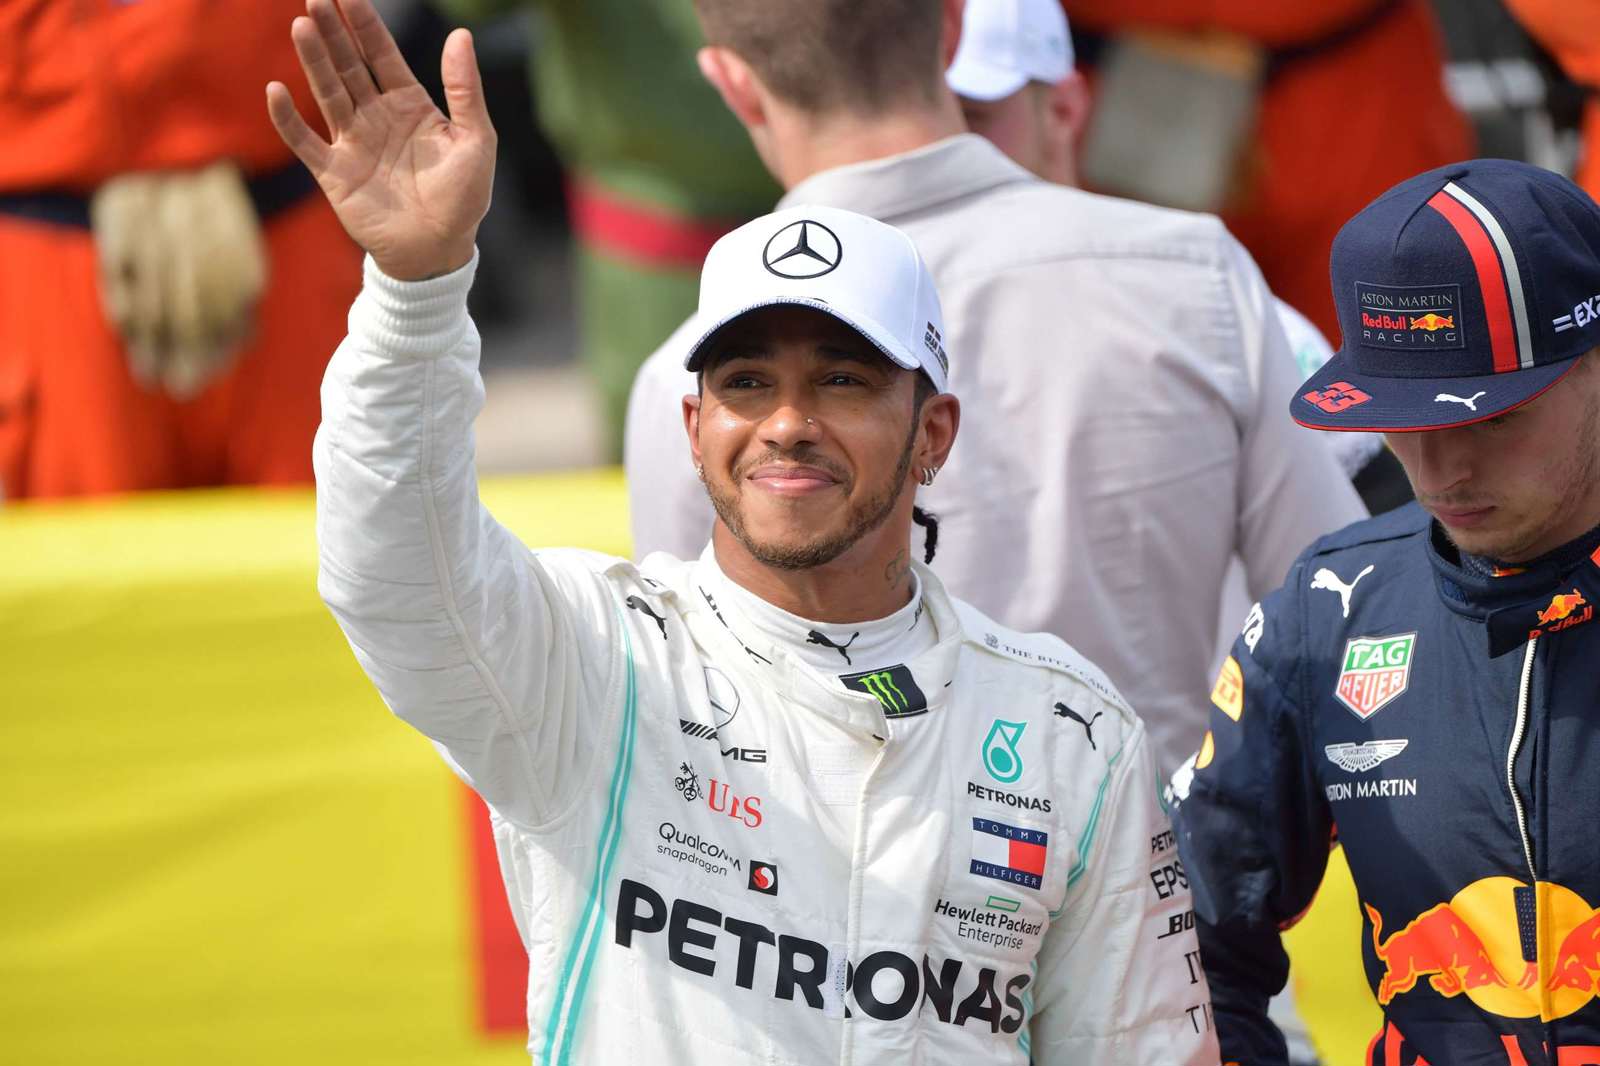 Lewis Hamilton's Mercedes F1 car sets new record in auction - The Economic  Times